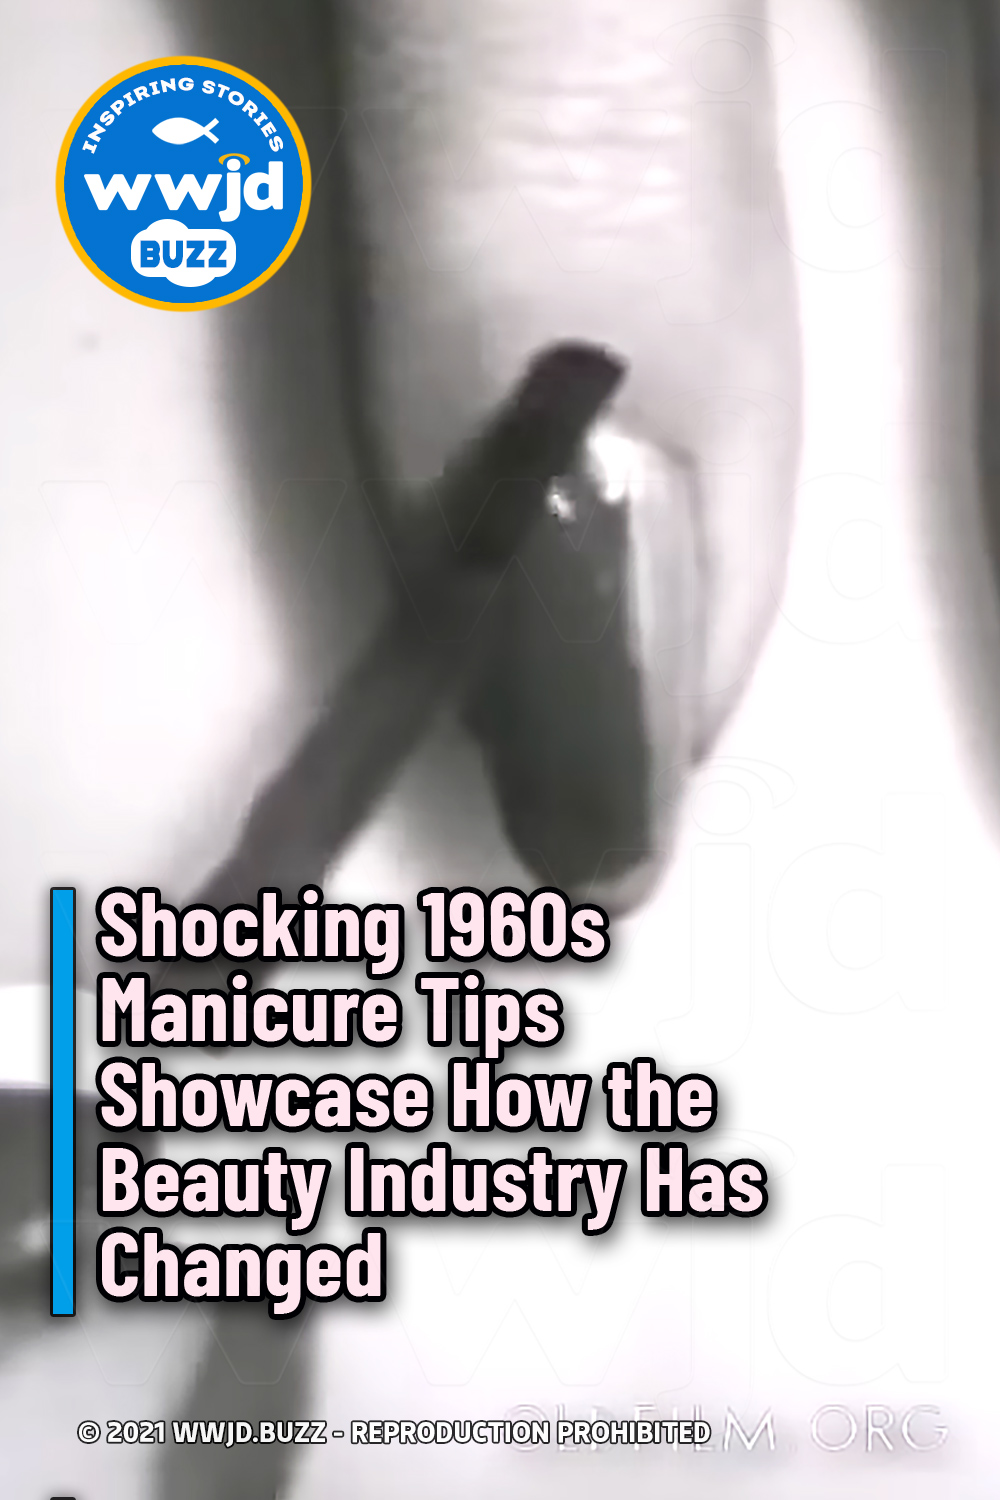 Shocking 1960s Manicure Tips Showcase How the Beauty Industry Has Changed